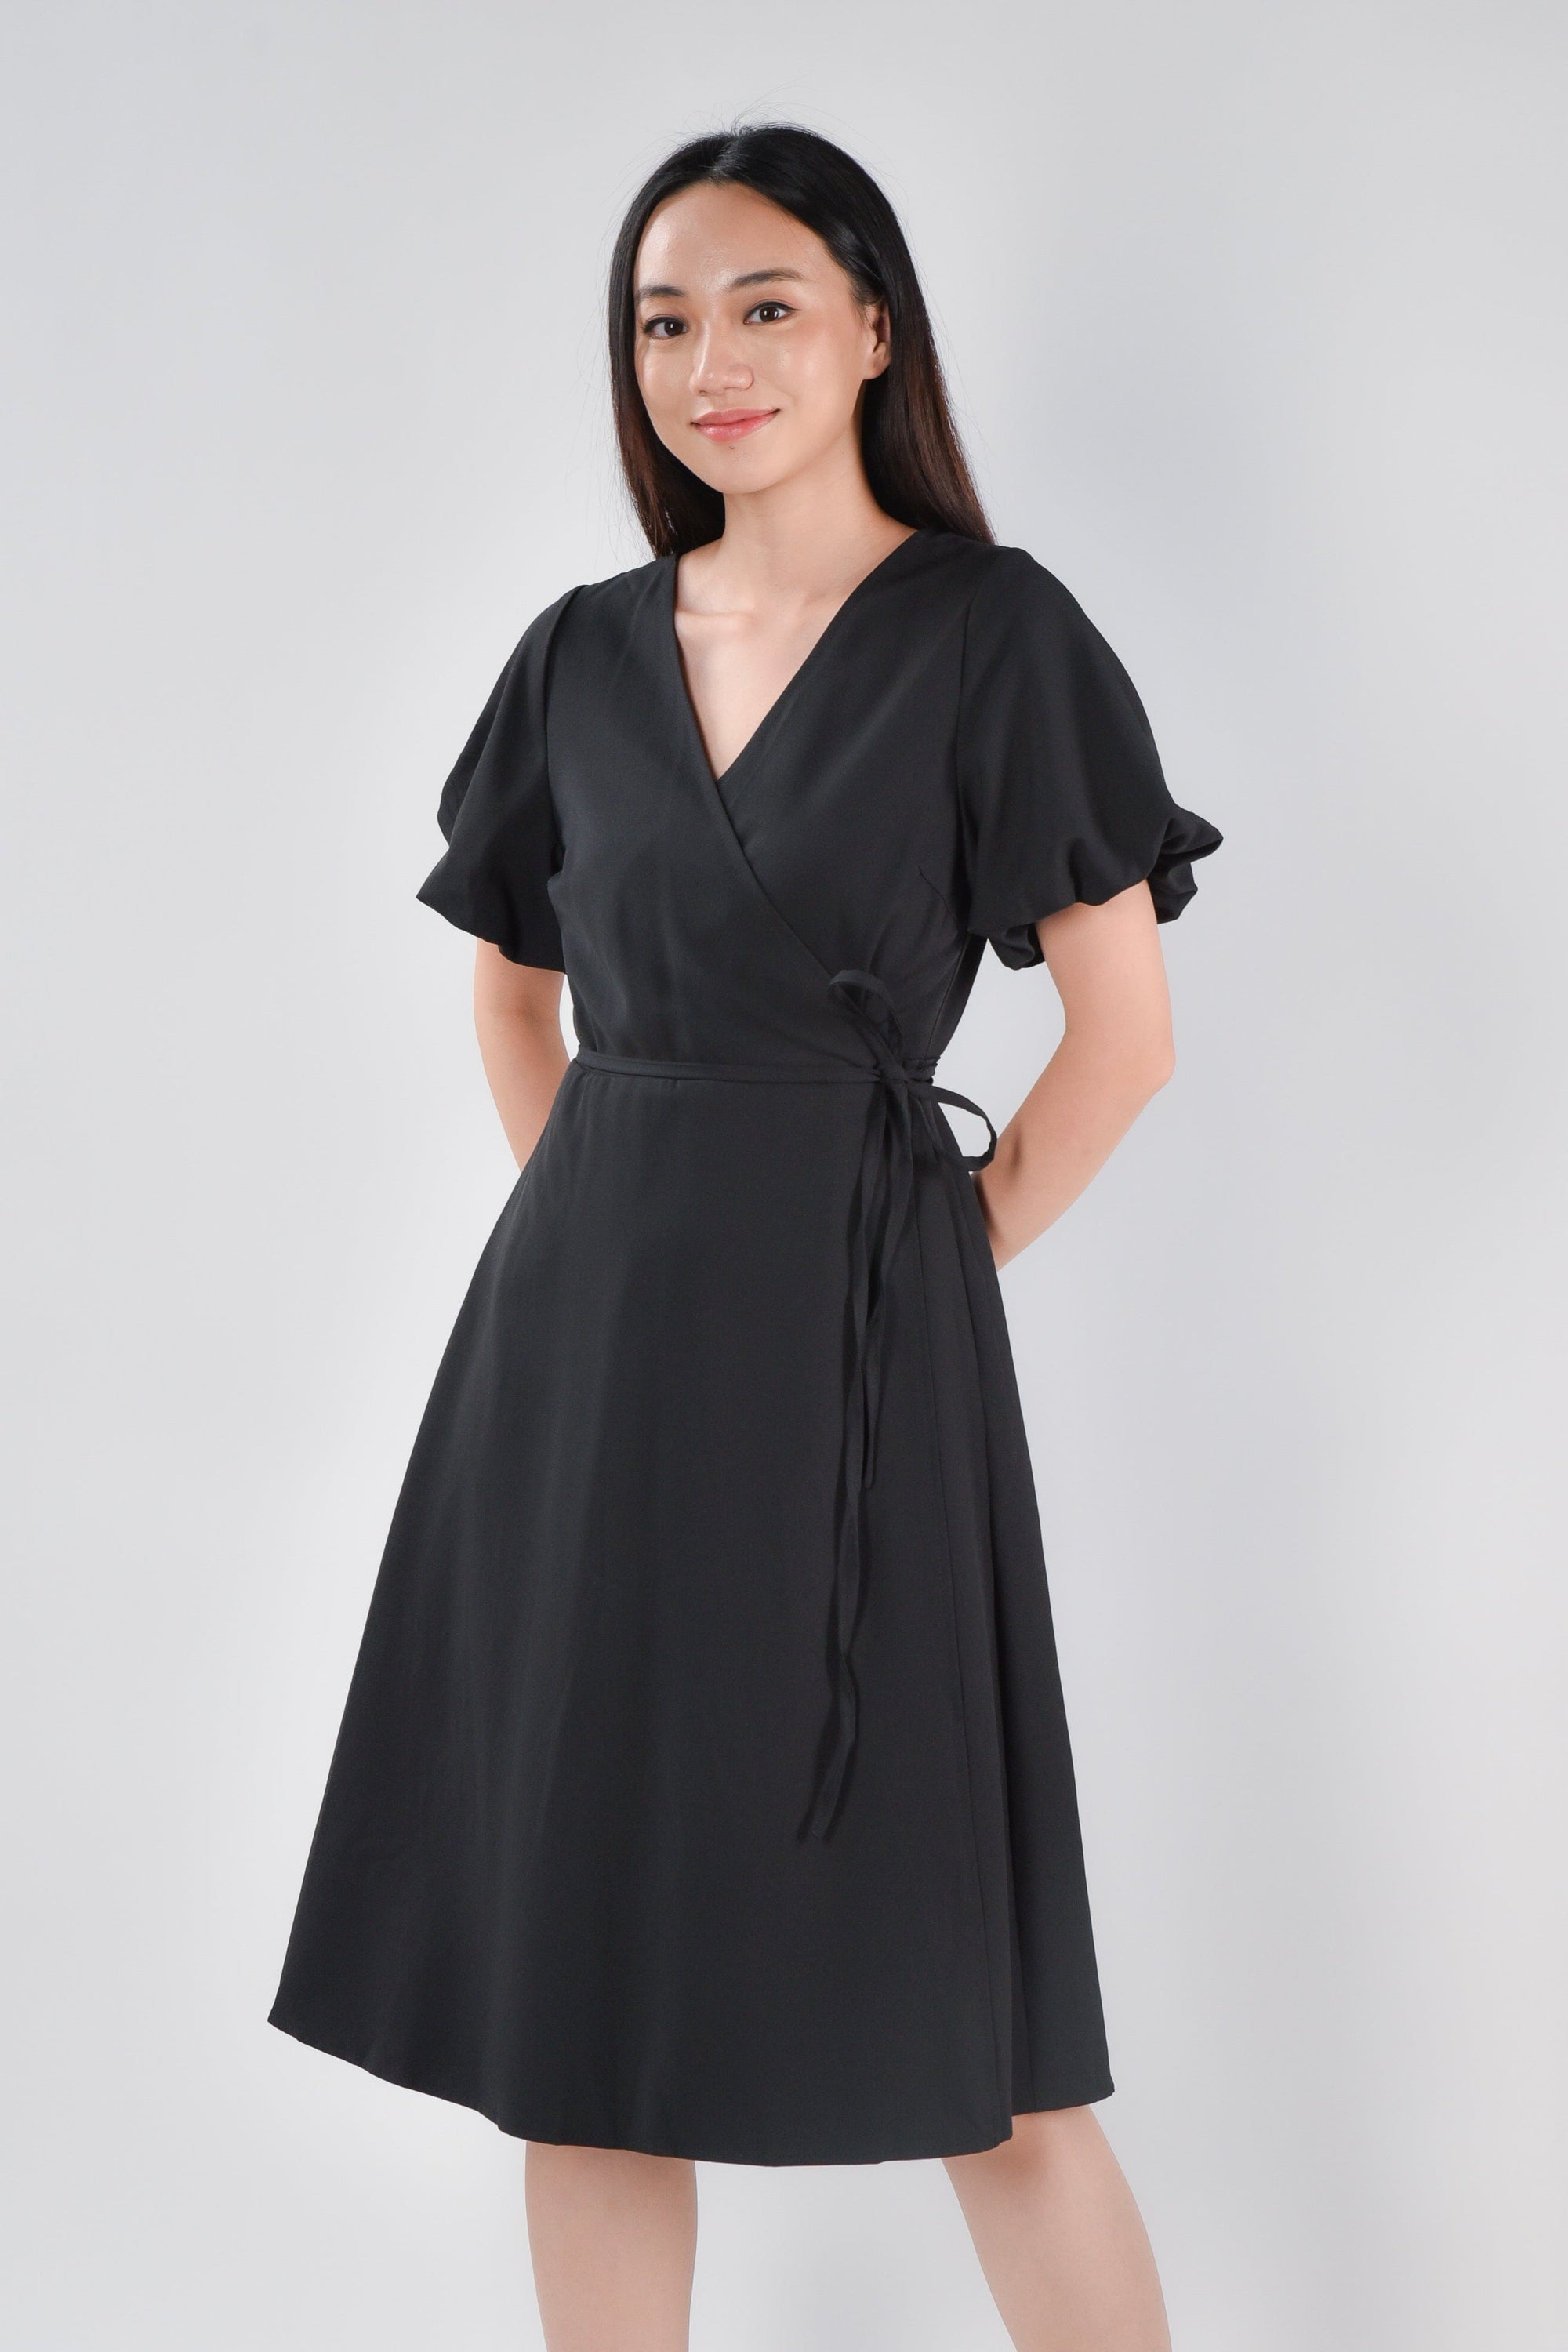 GERI PUFF-SLEEVES WRAP DRESS IN BLACK - All Would Envy